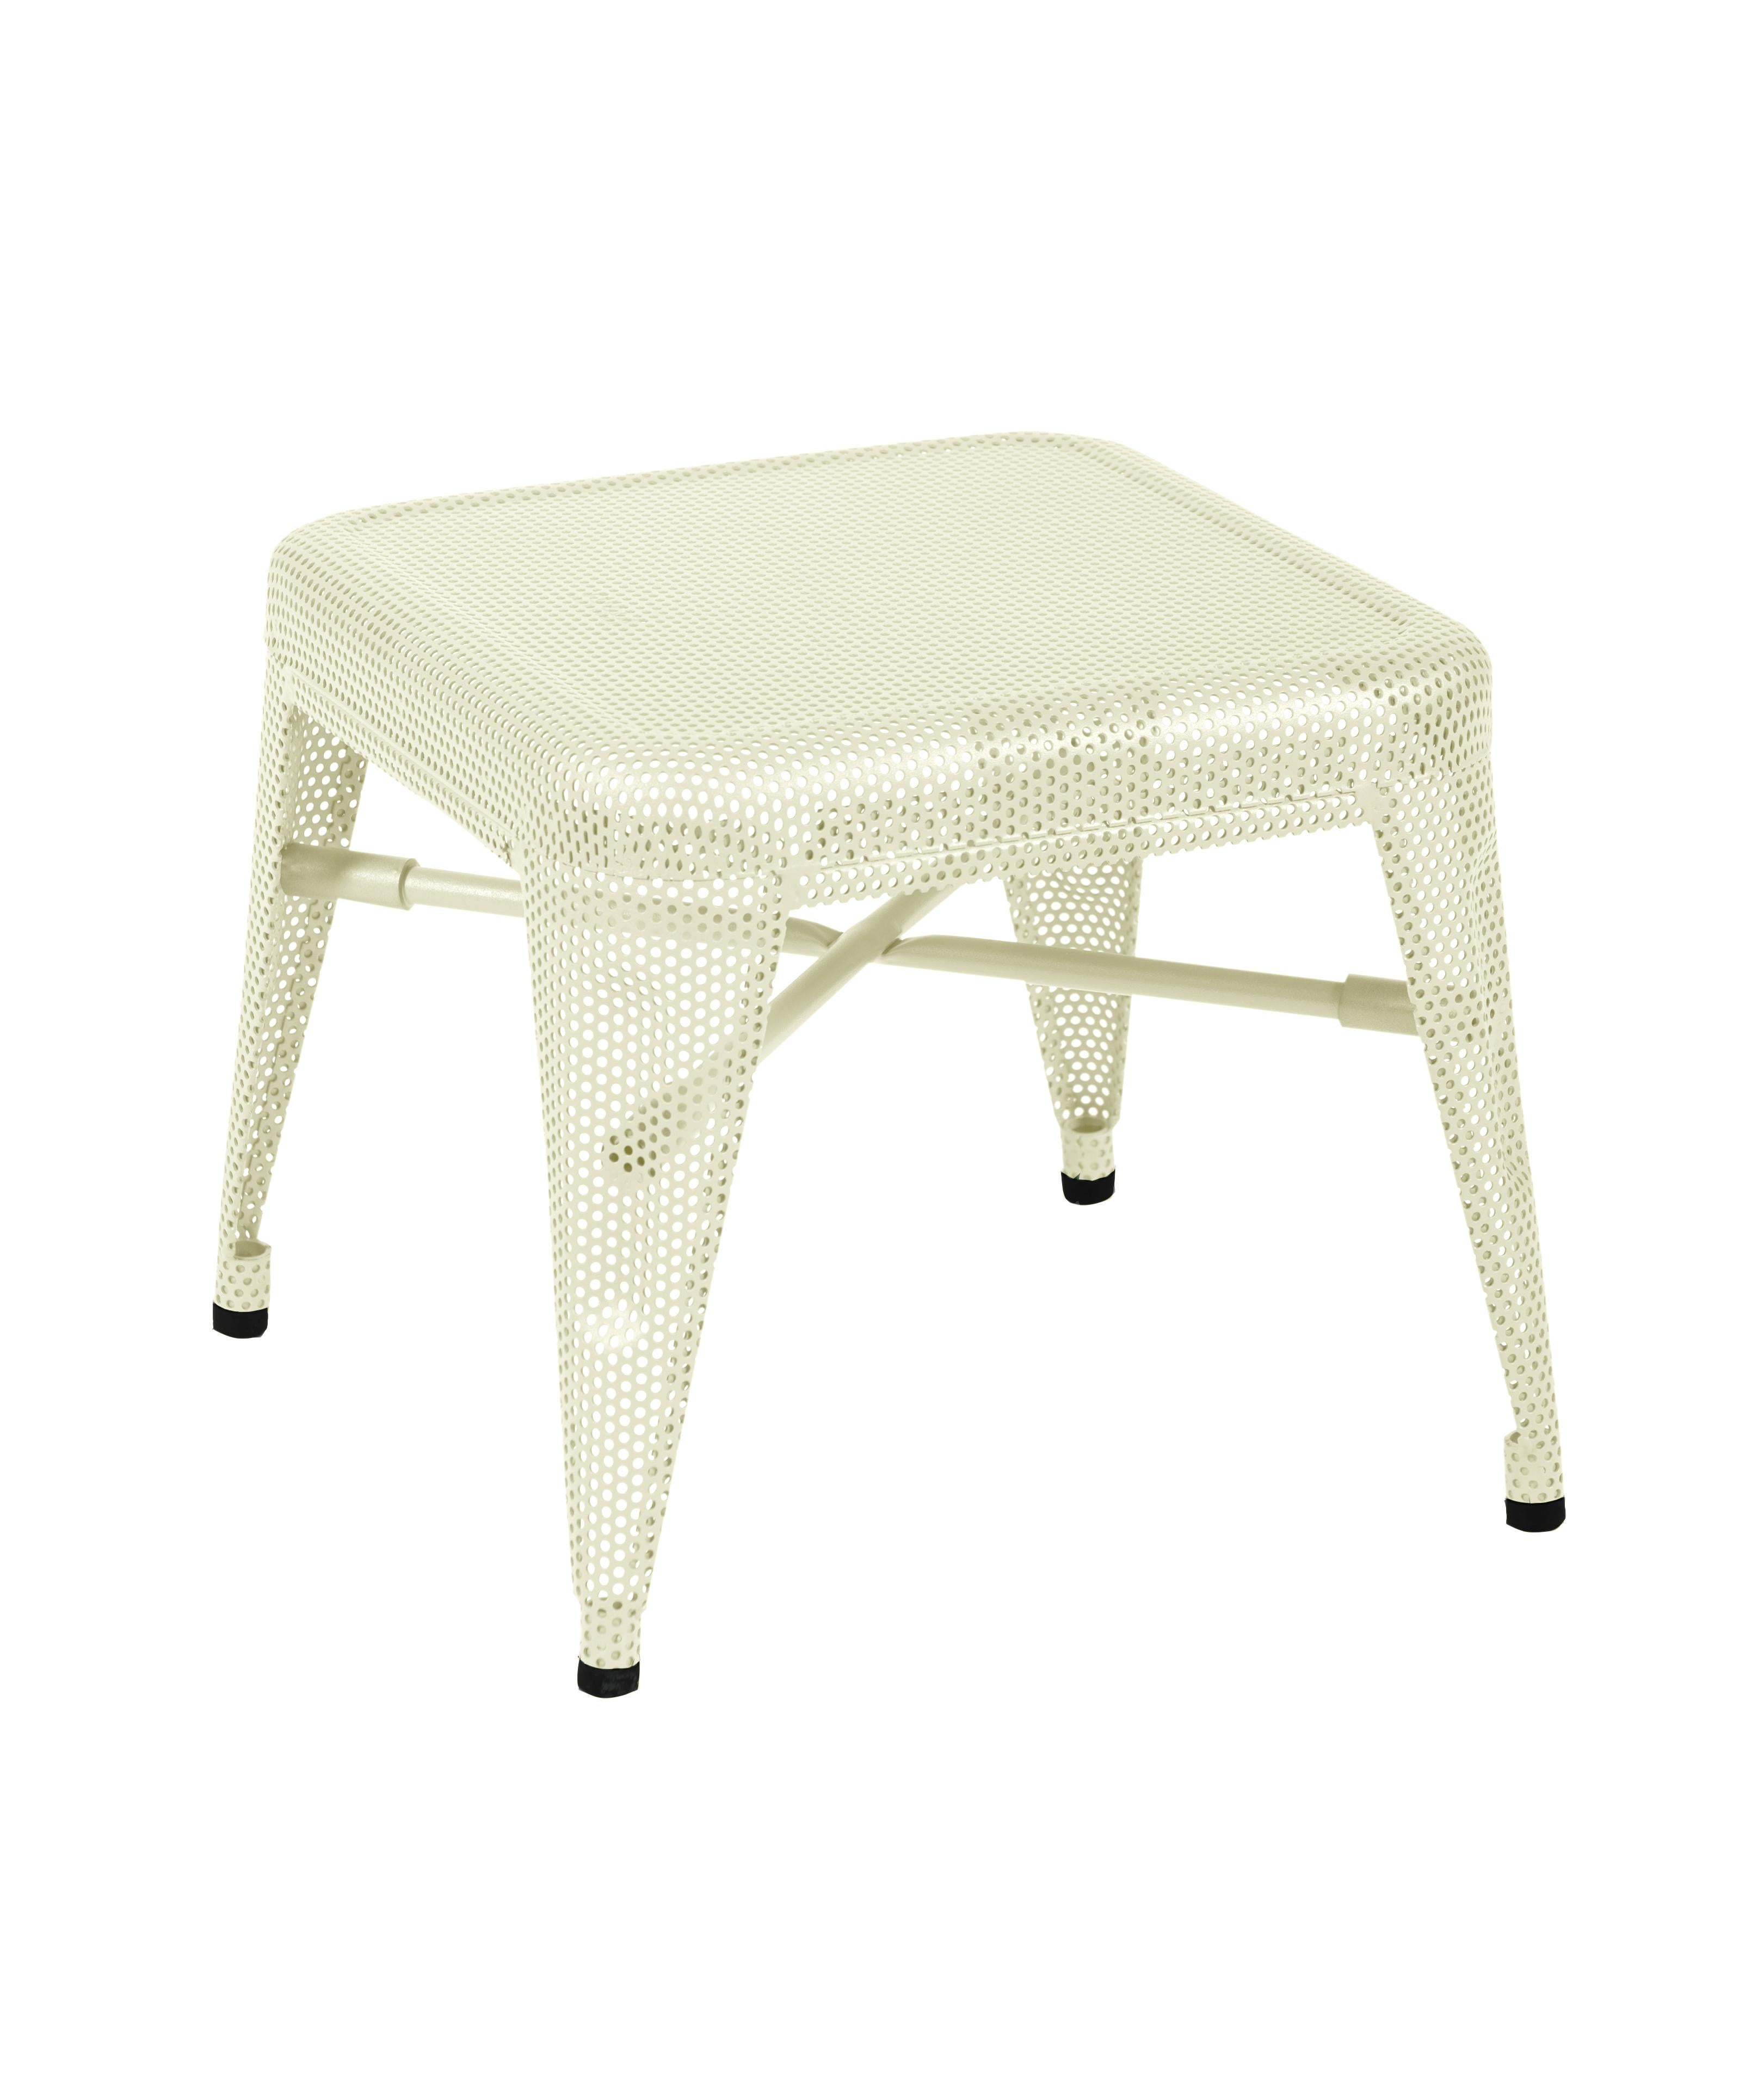 For Sale: White (Ivoire) H30 Indoor Perforated Steel Stool in Essential Colors by Tolix